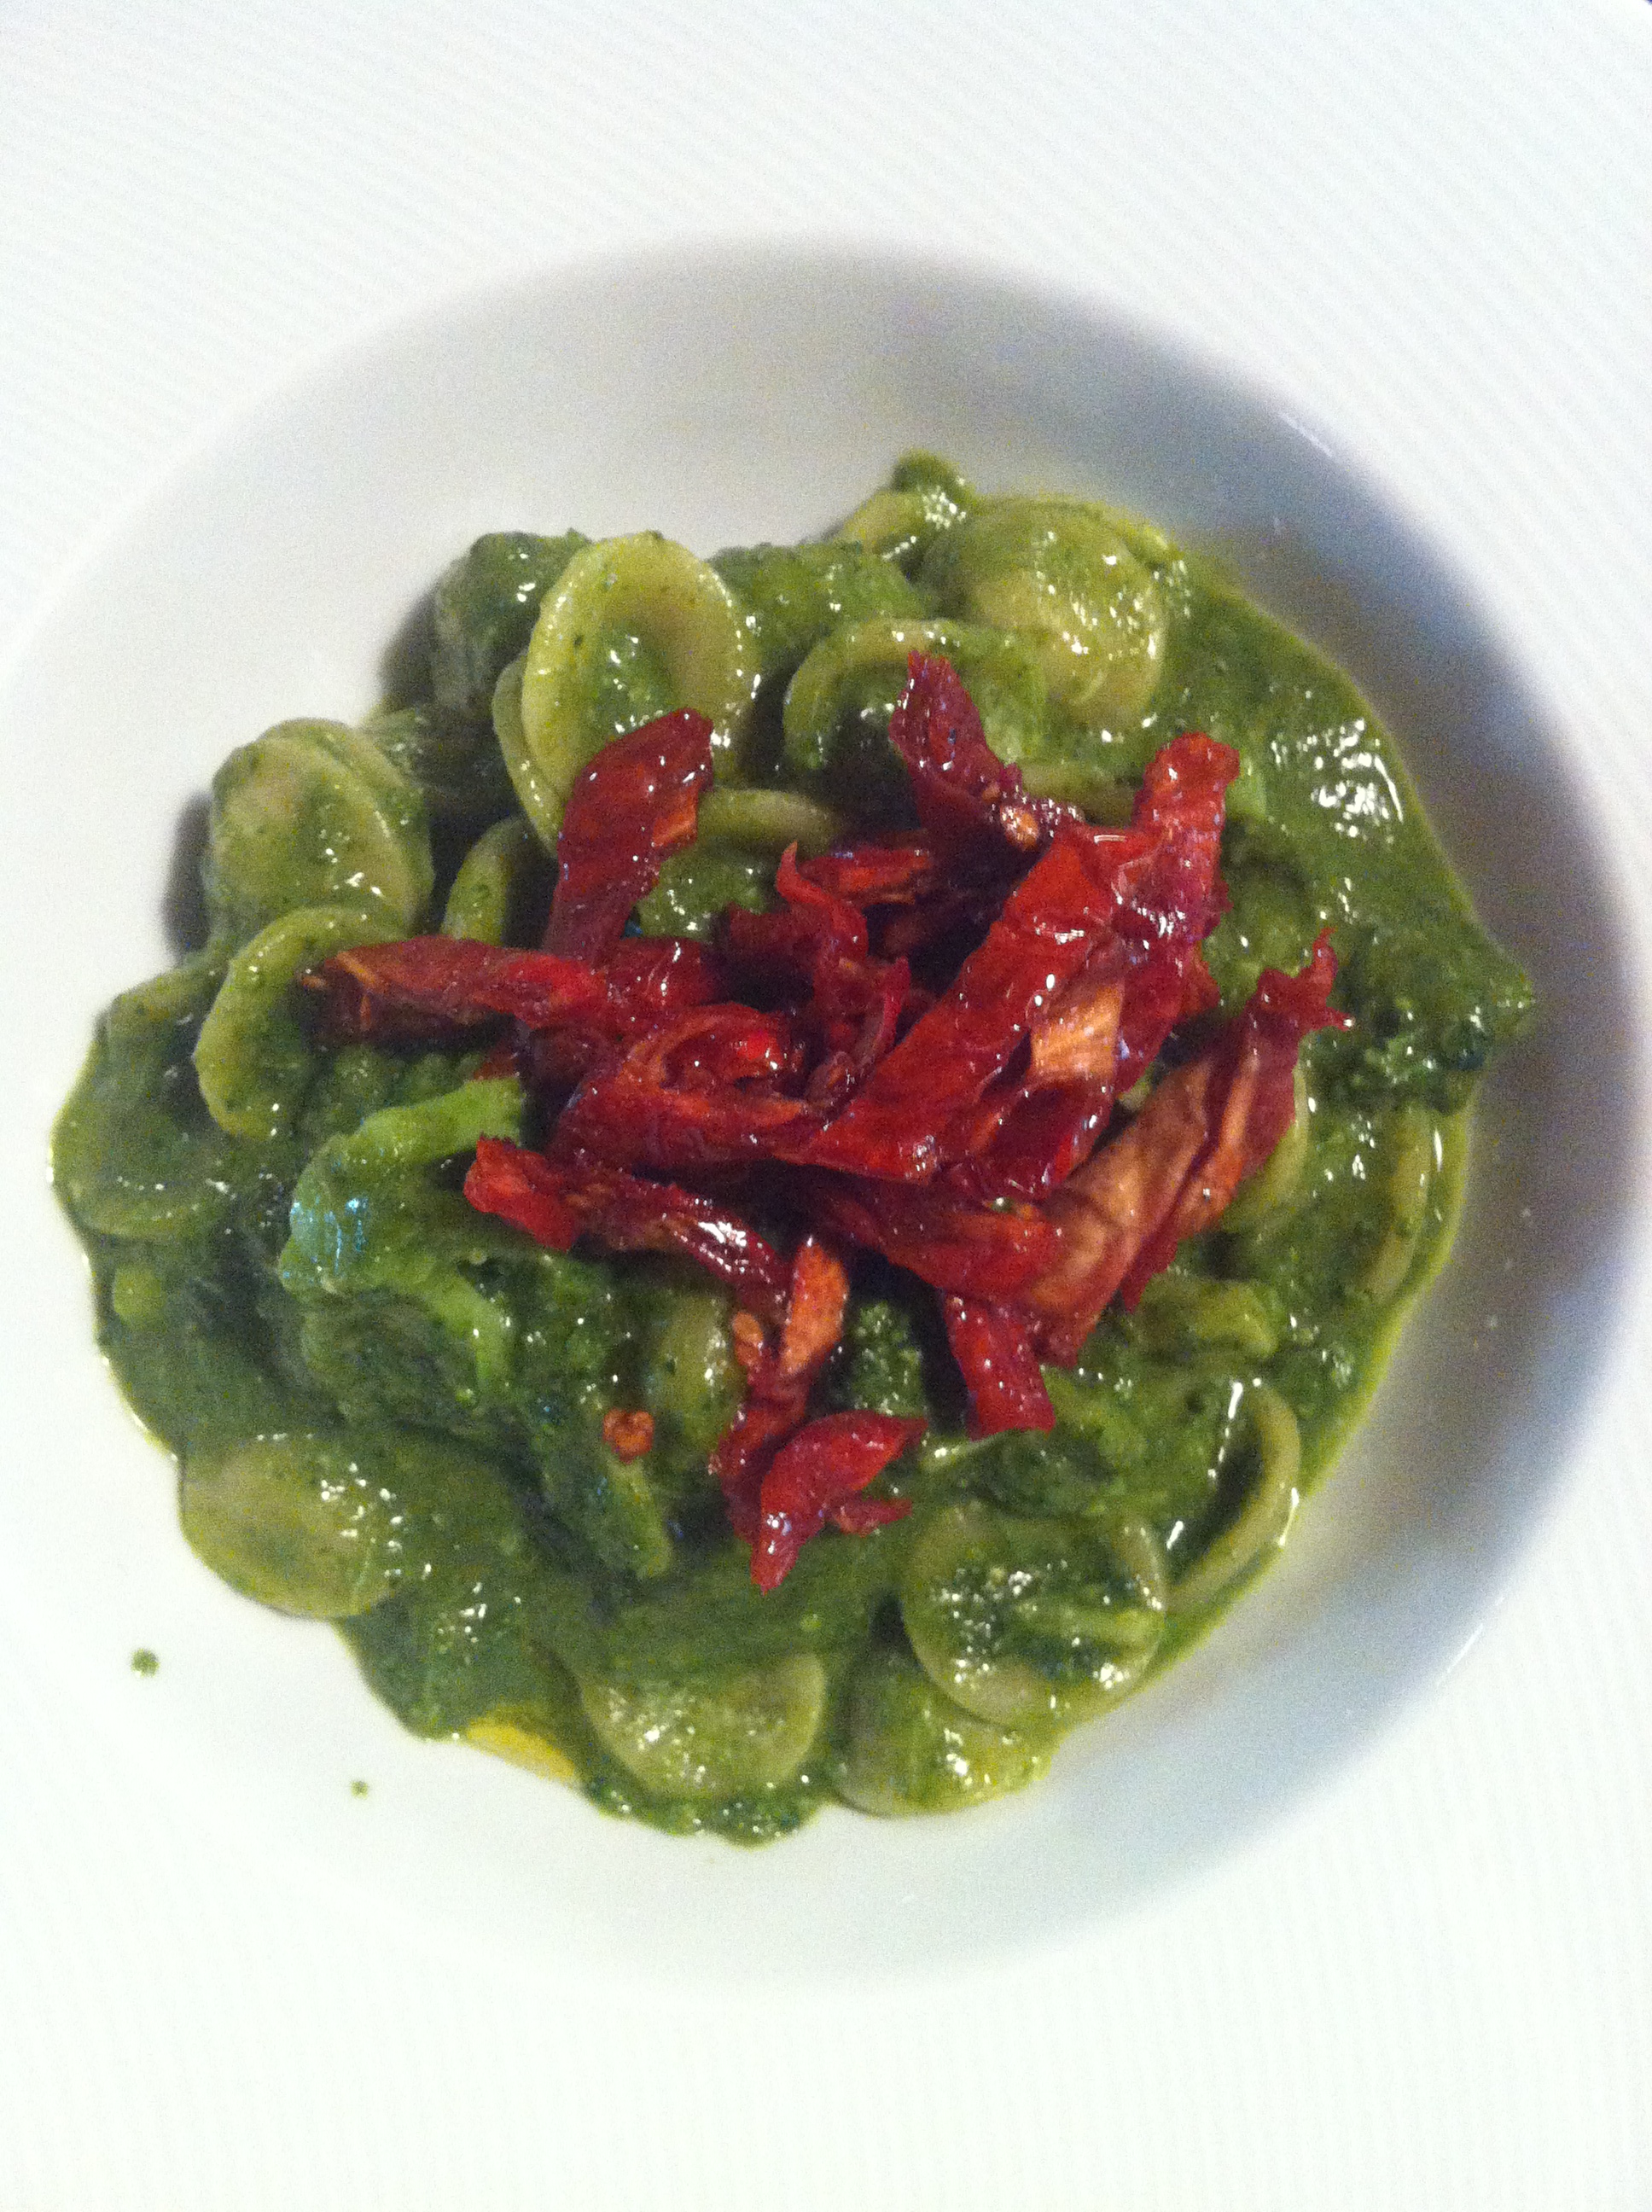 home made pasta with broccoli sauce and dried tomatoes